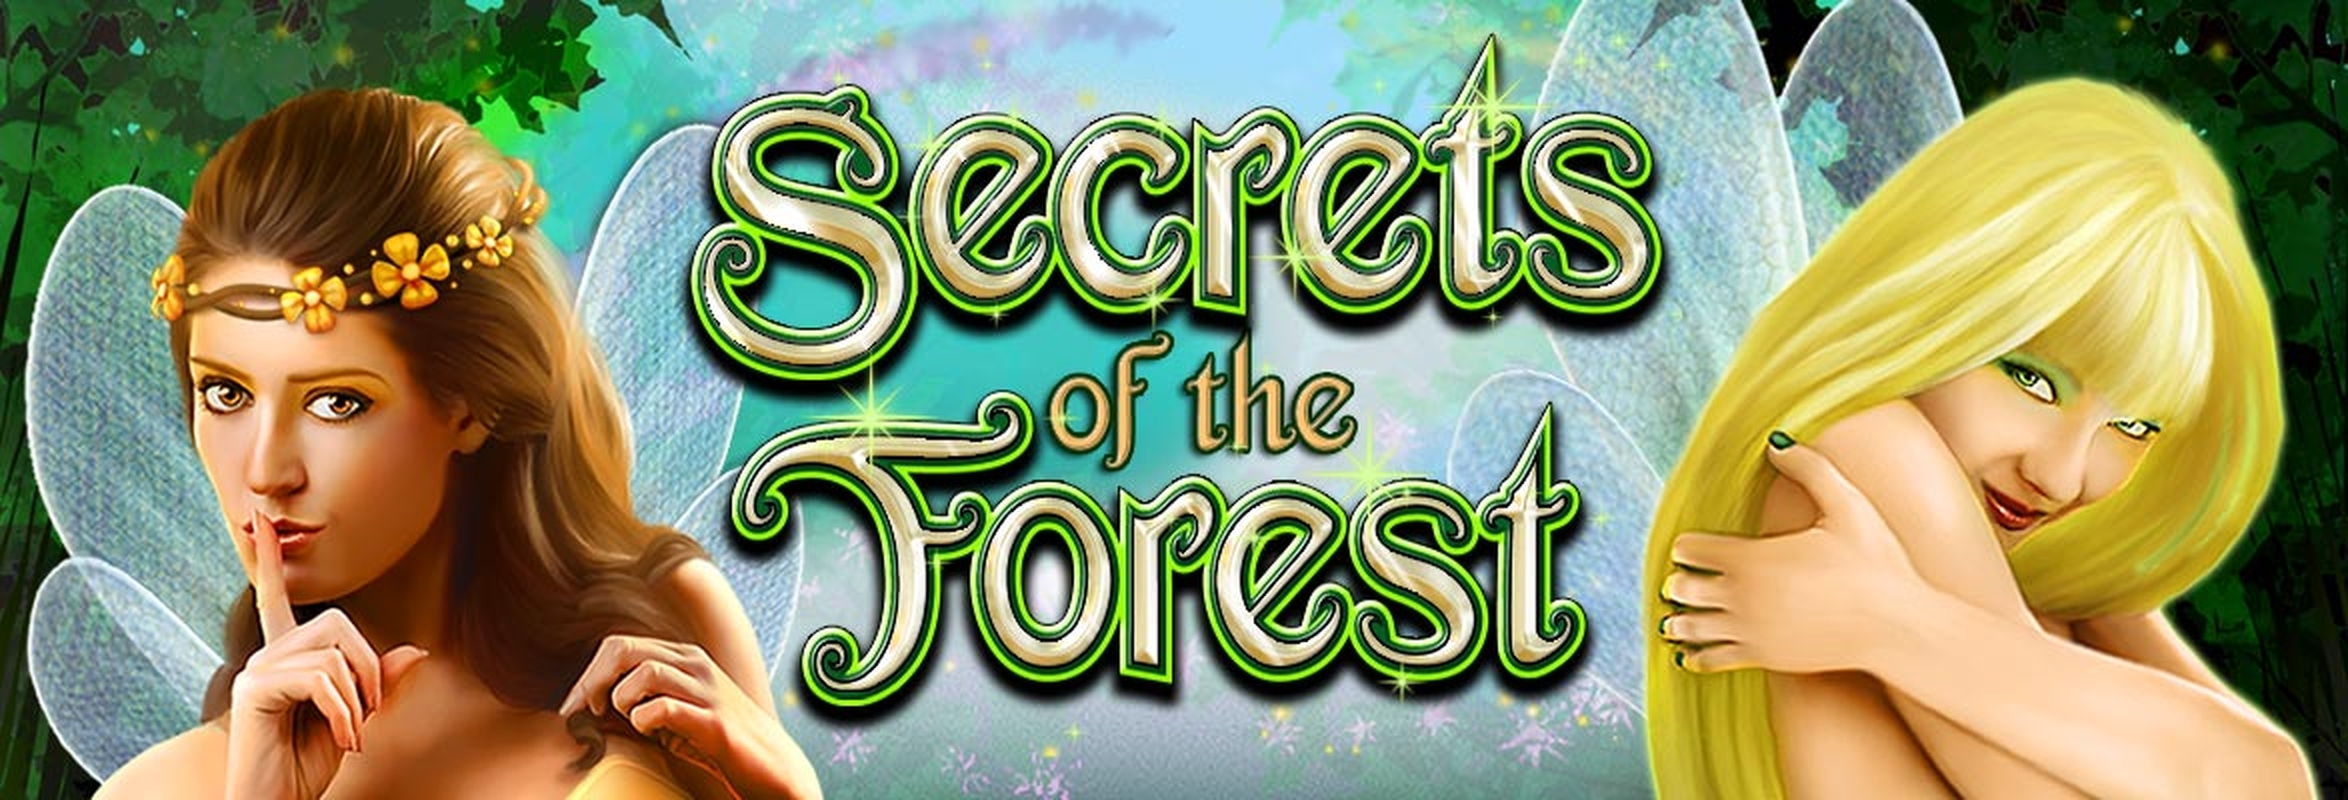 The Secrets Of The Forest Online Slot Demo Game by High 5 Games